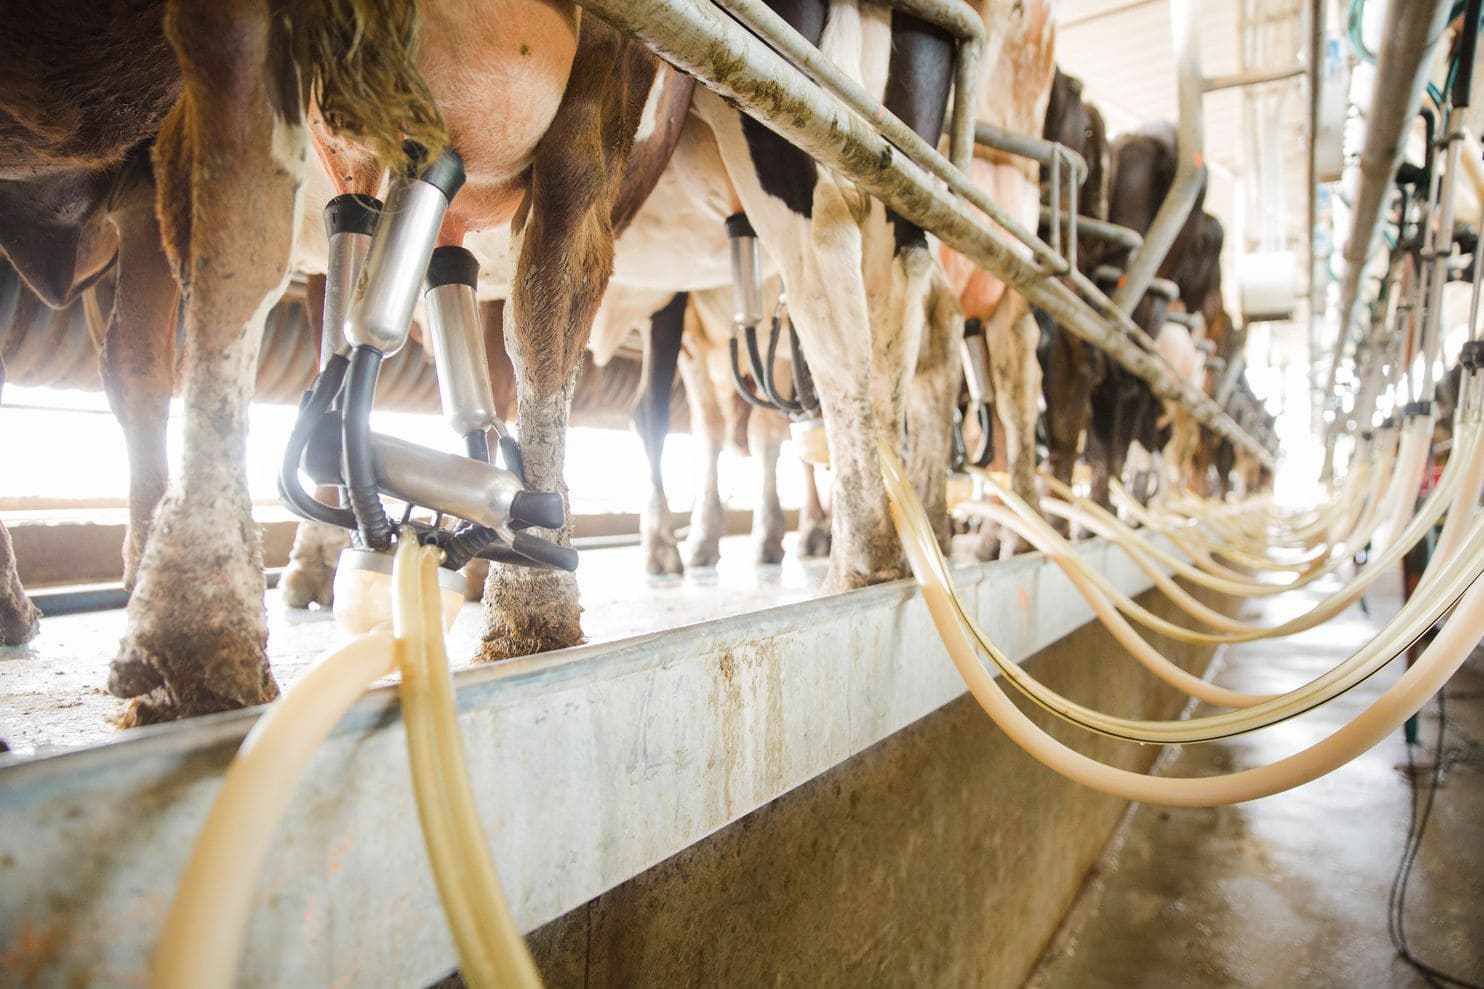 Cows are milked at Seven Oaks Dairy in Waynesboro, Ga., in March. (Kevin D. Liles for The Washington Post)